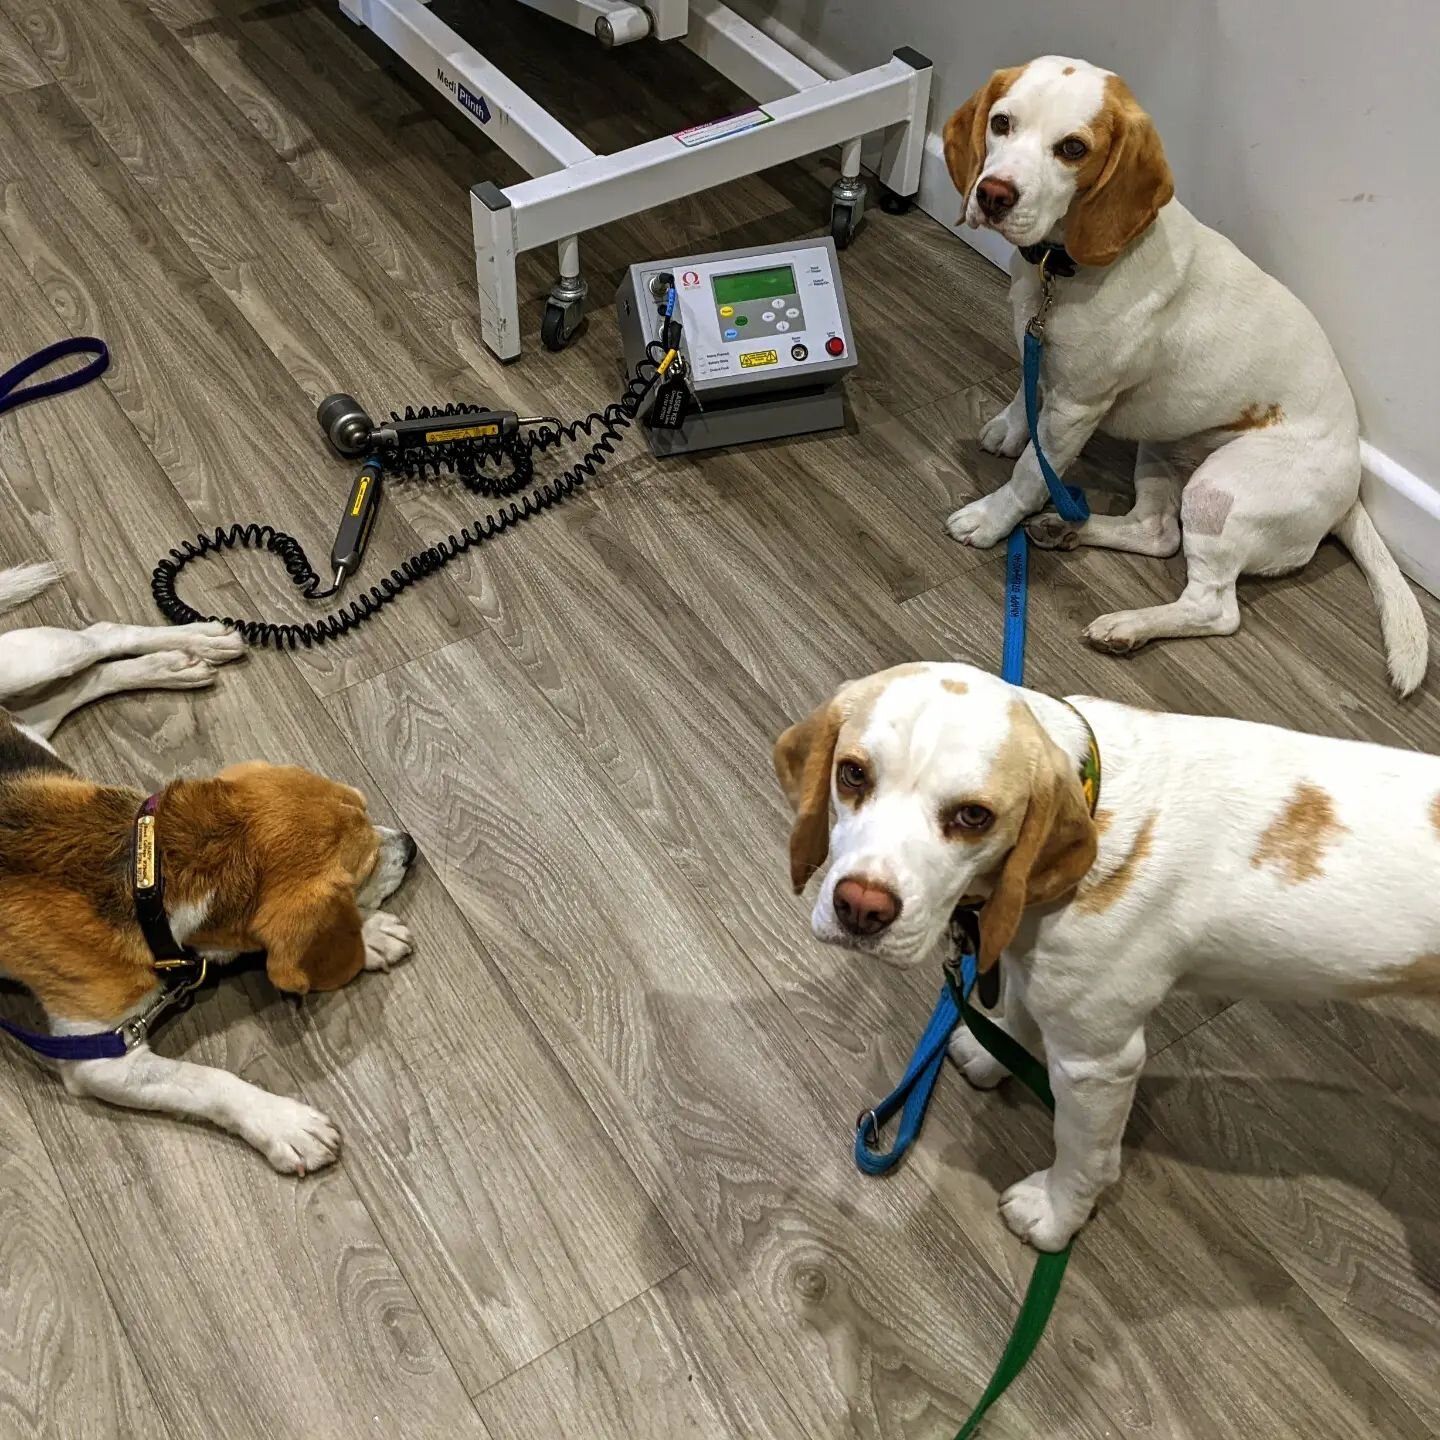 One of these gorgeous pups needed our help and who could say no to those little faces 😍🥰

#beaglesofinstagram #canineosteopathy #lasertherapy